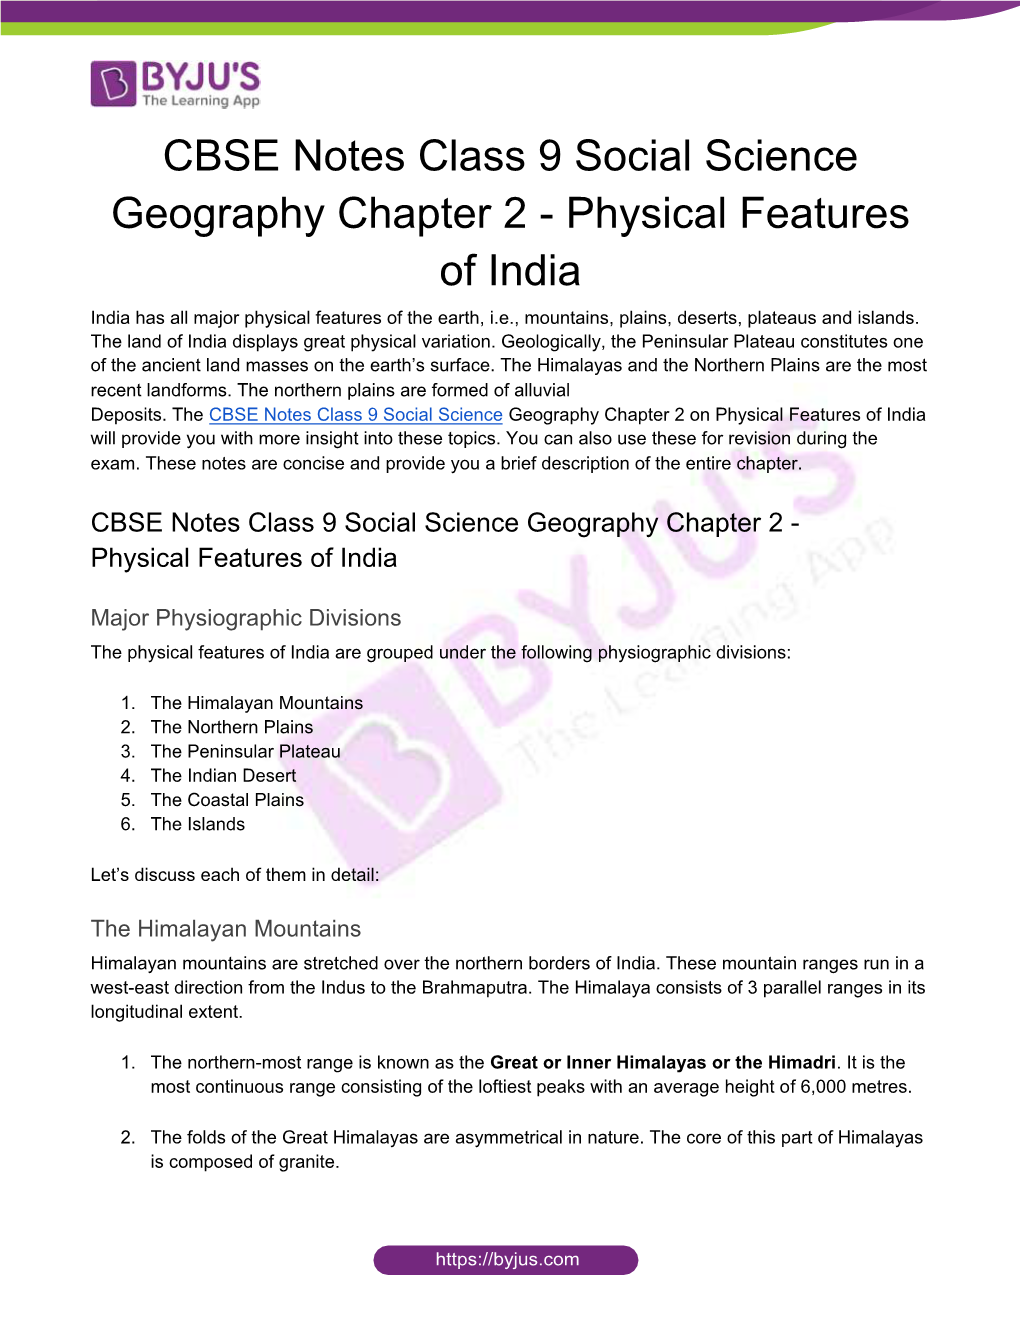 CBSE Notes Class 9 Social Science Geography Chapter 2